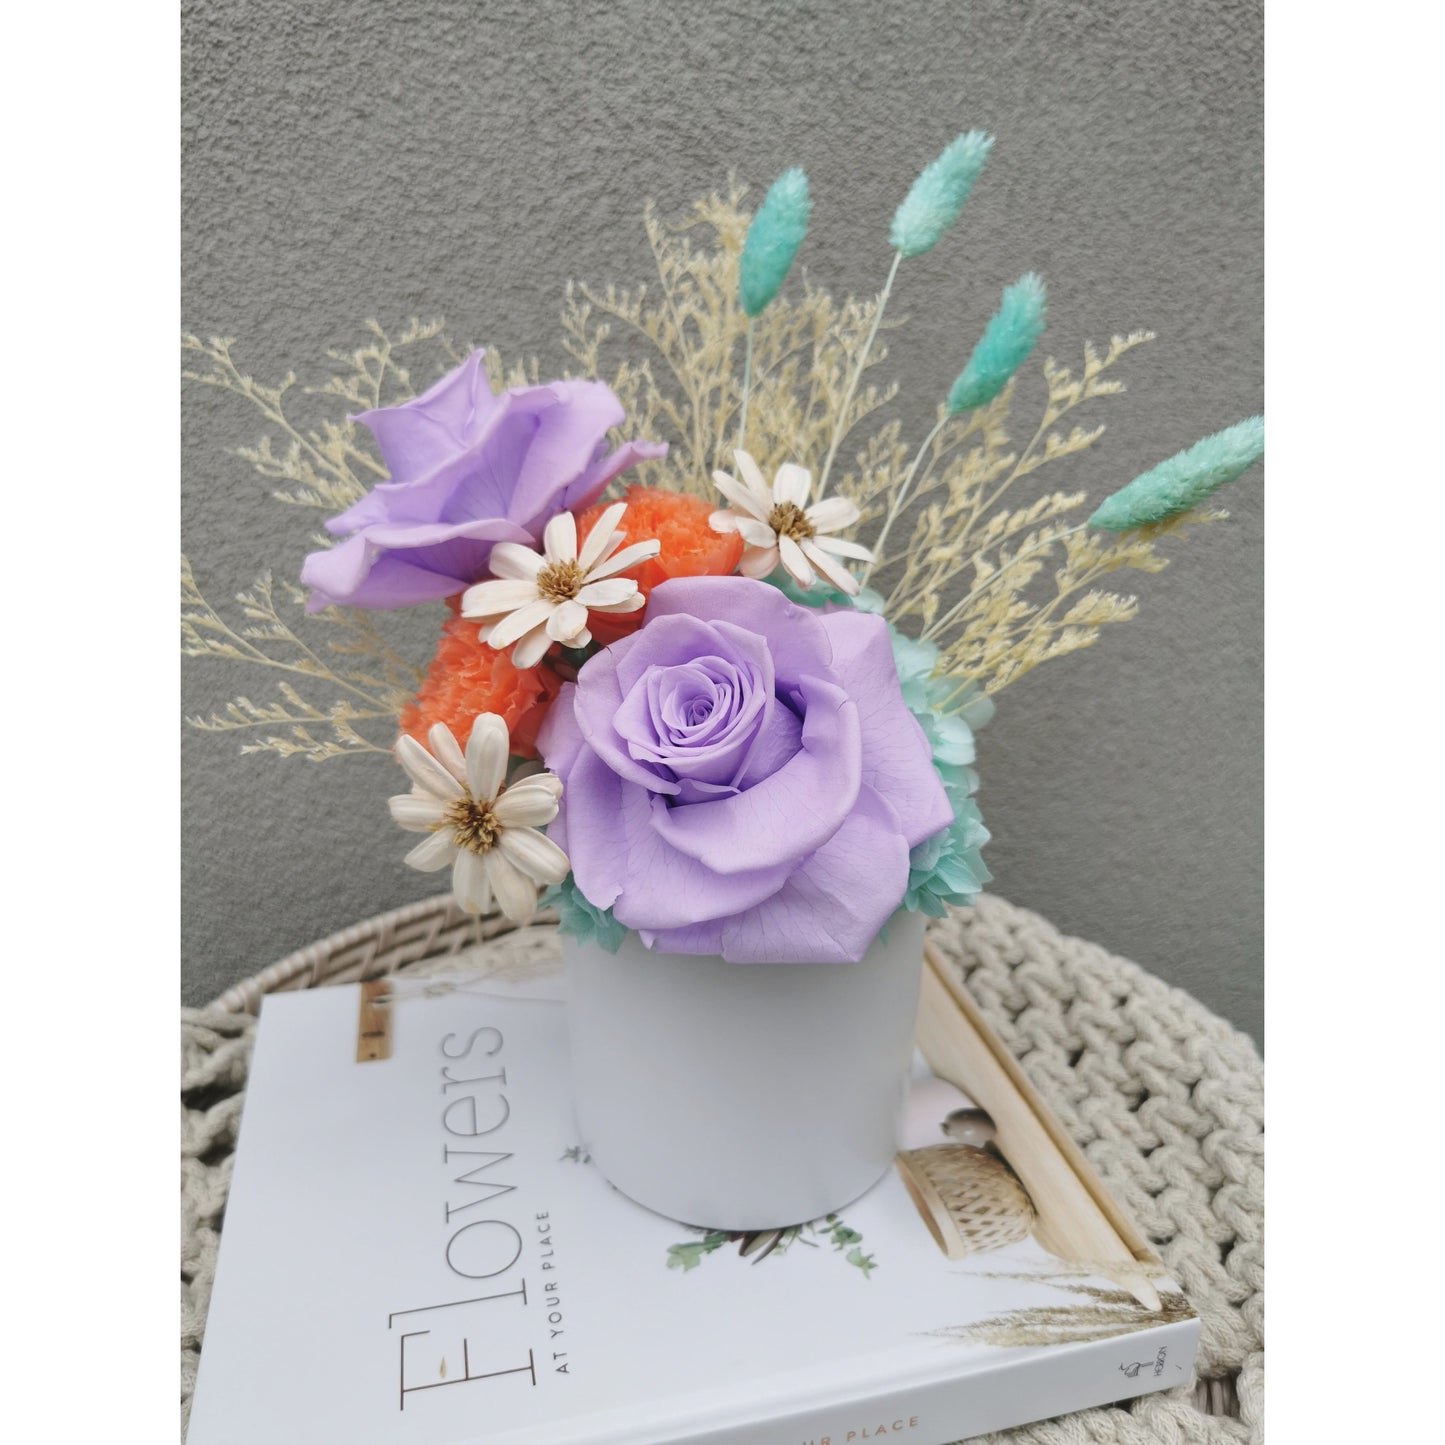 Dried & Preserved flower arrangement in purple, orange, white, blue & yellow. Featuring purple preserved roses and orange preserved carnations. Flowers are set in to a white pot. Photo shows arrangement sitting on a book on an angle against a blank wall